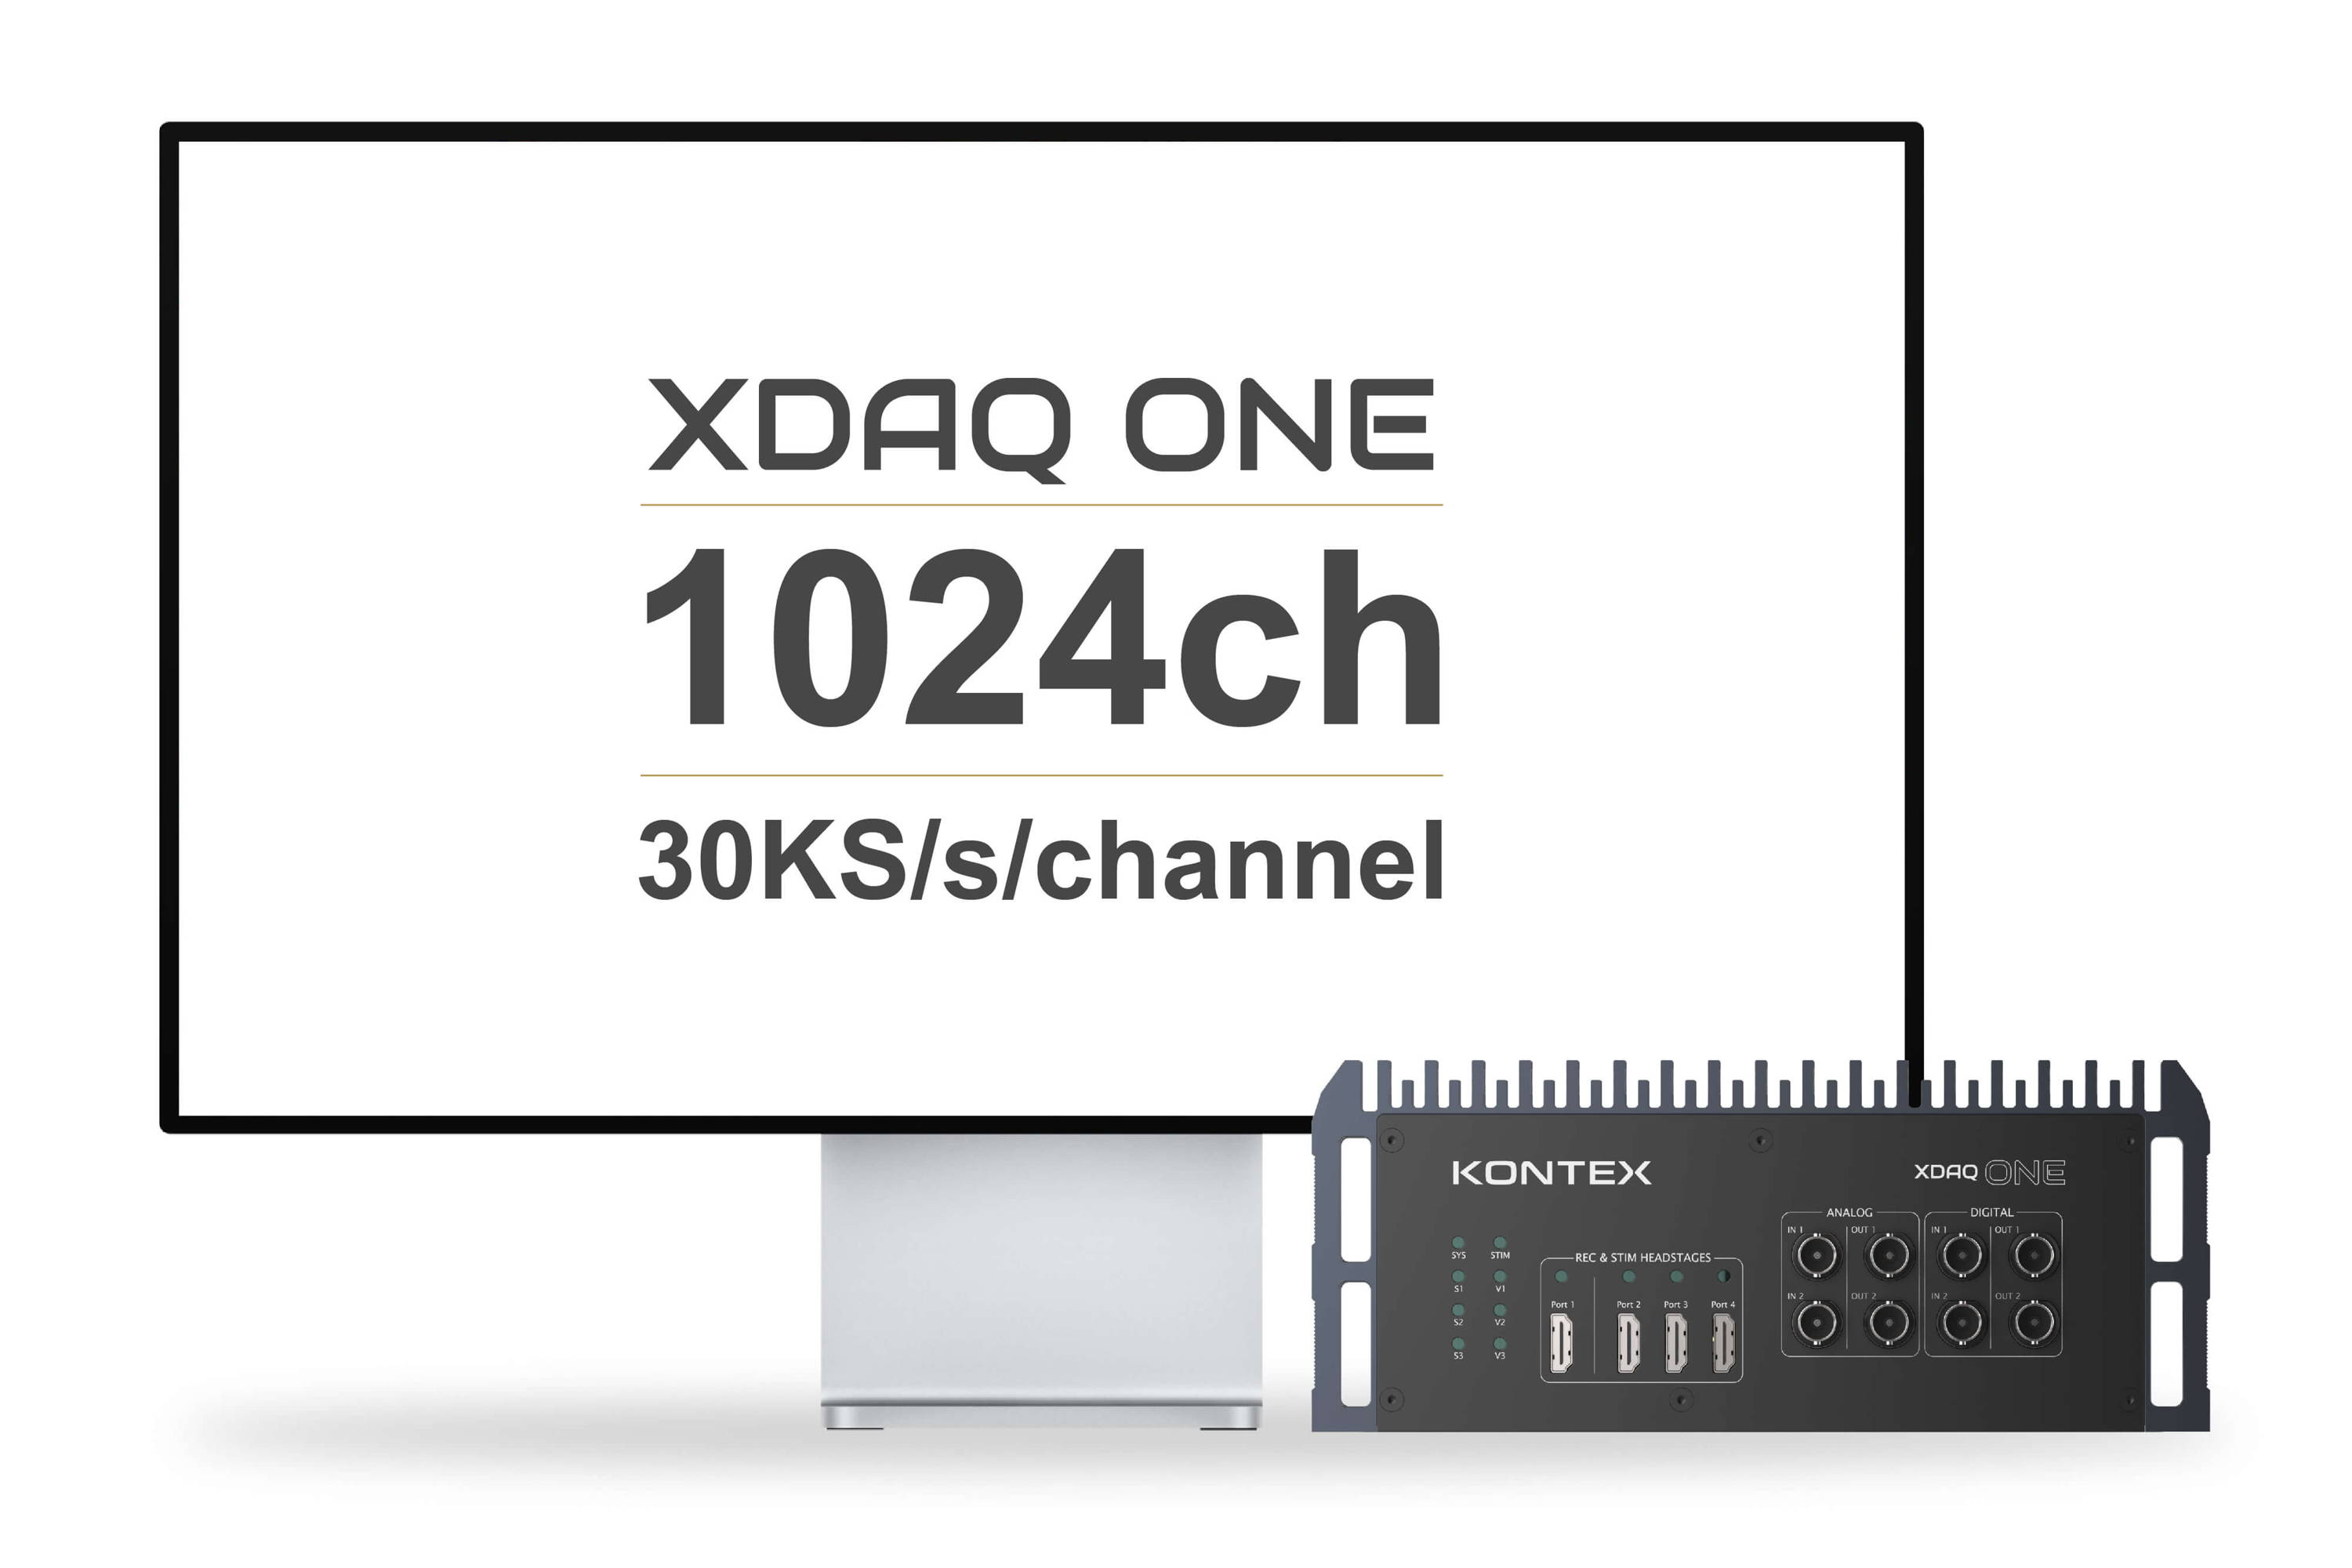 Xdaq ™ ONE is placed beside a desktop screen, which shows the 1024 channels at 30kS/s per chennel